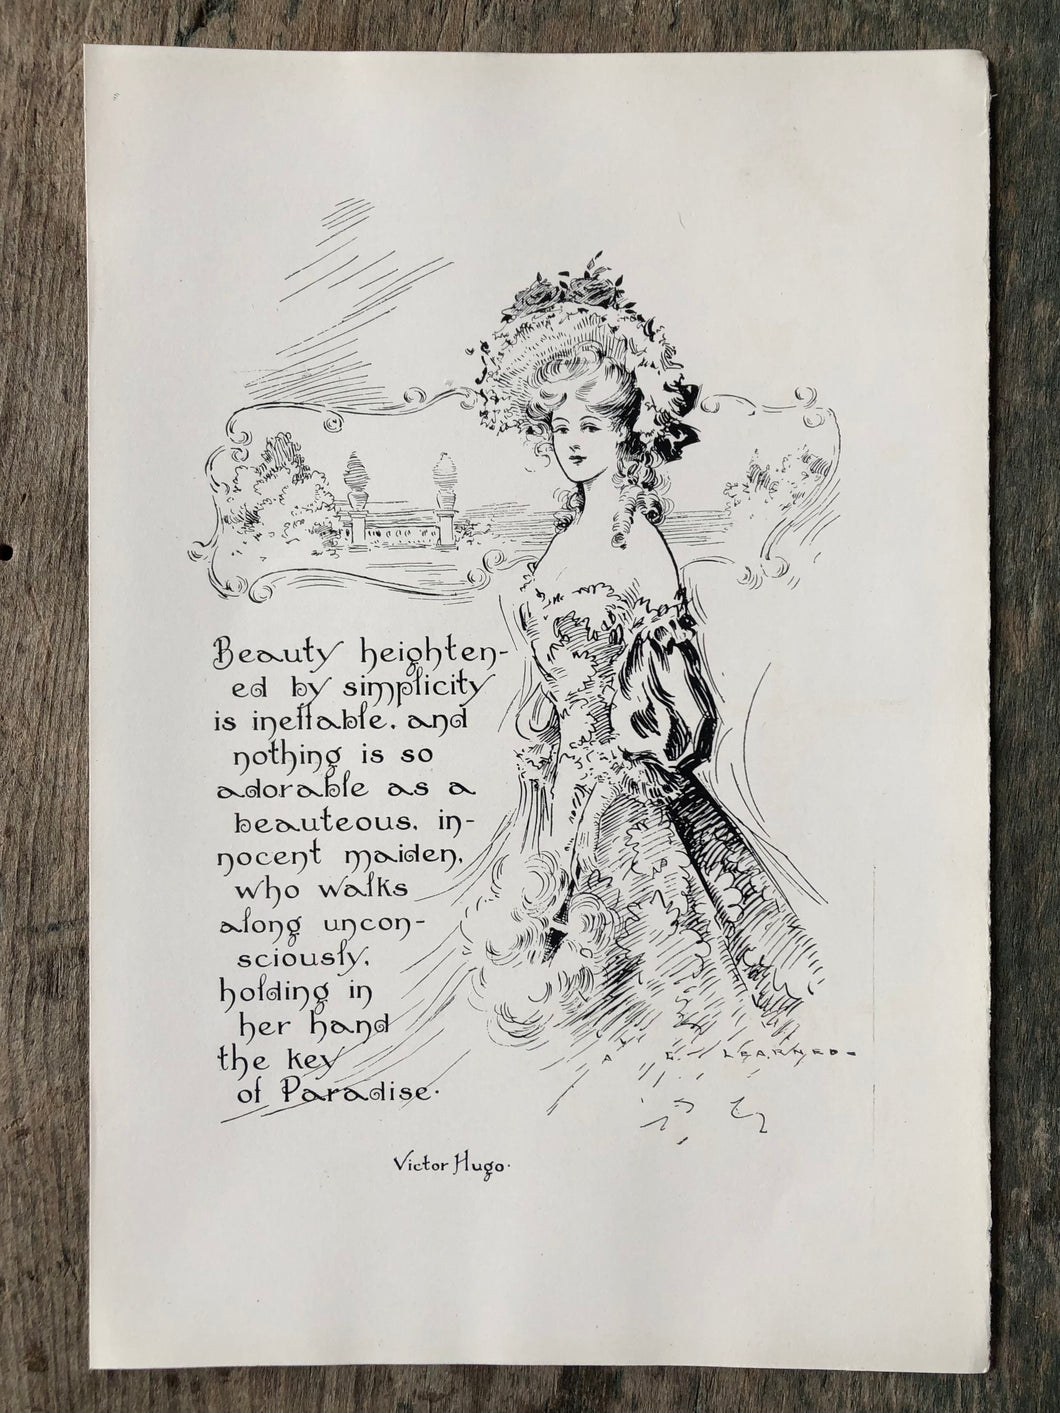 Victor Hugo Quote Print illustrated by Arthur G. Learned from “Eve’s Daughter”